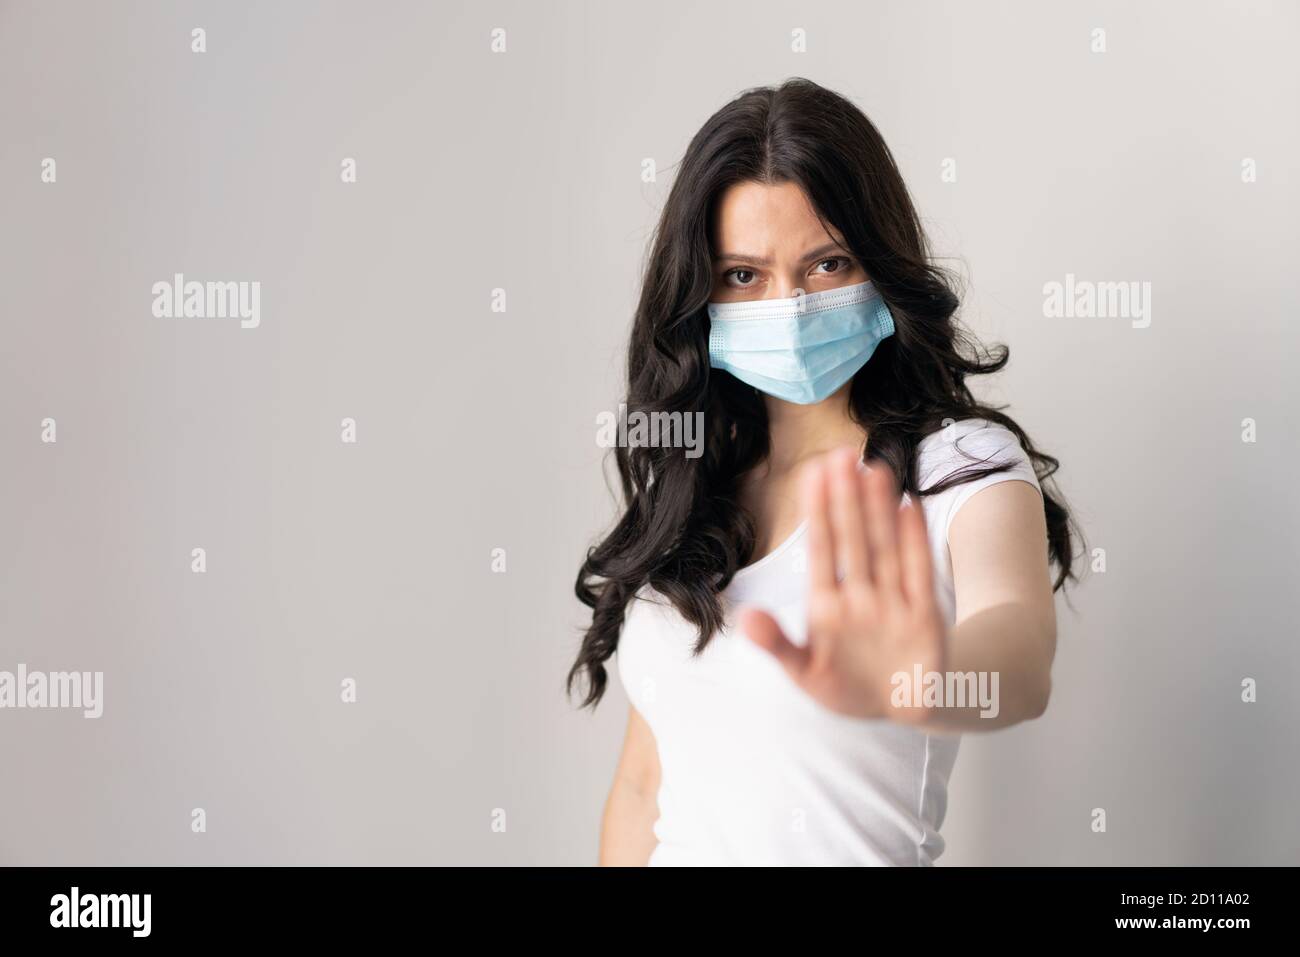 Woman wearing mask for protection from disease and show stop hands gesture for stop corona virus outbreak. Appeal to stay home. Coronavirus concept. Stock Photo